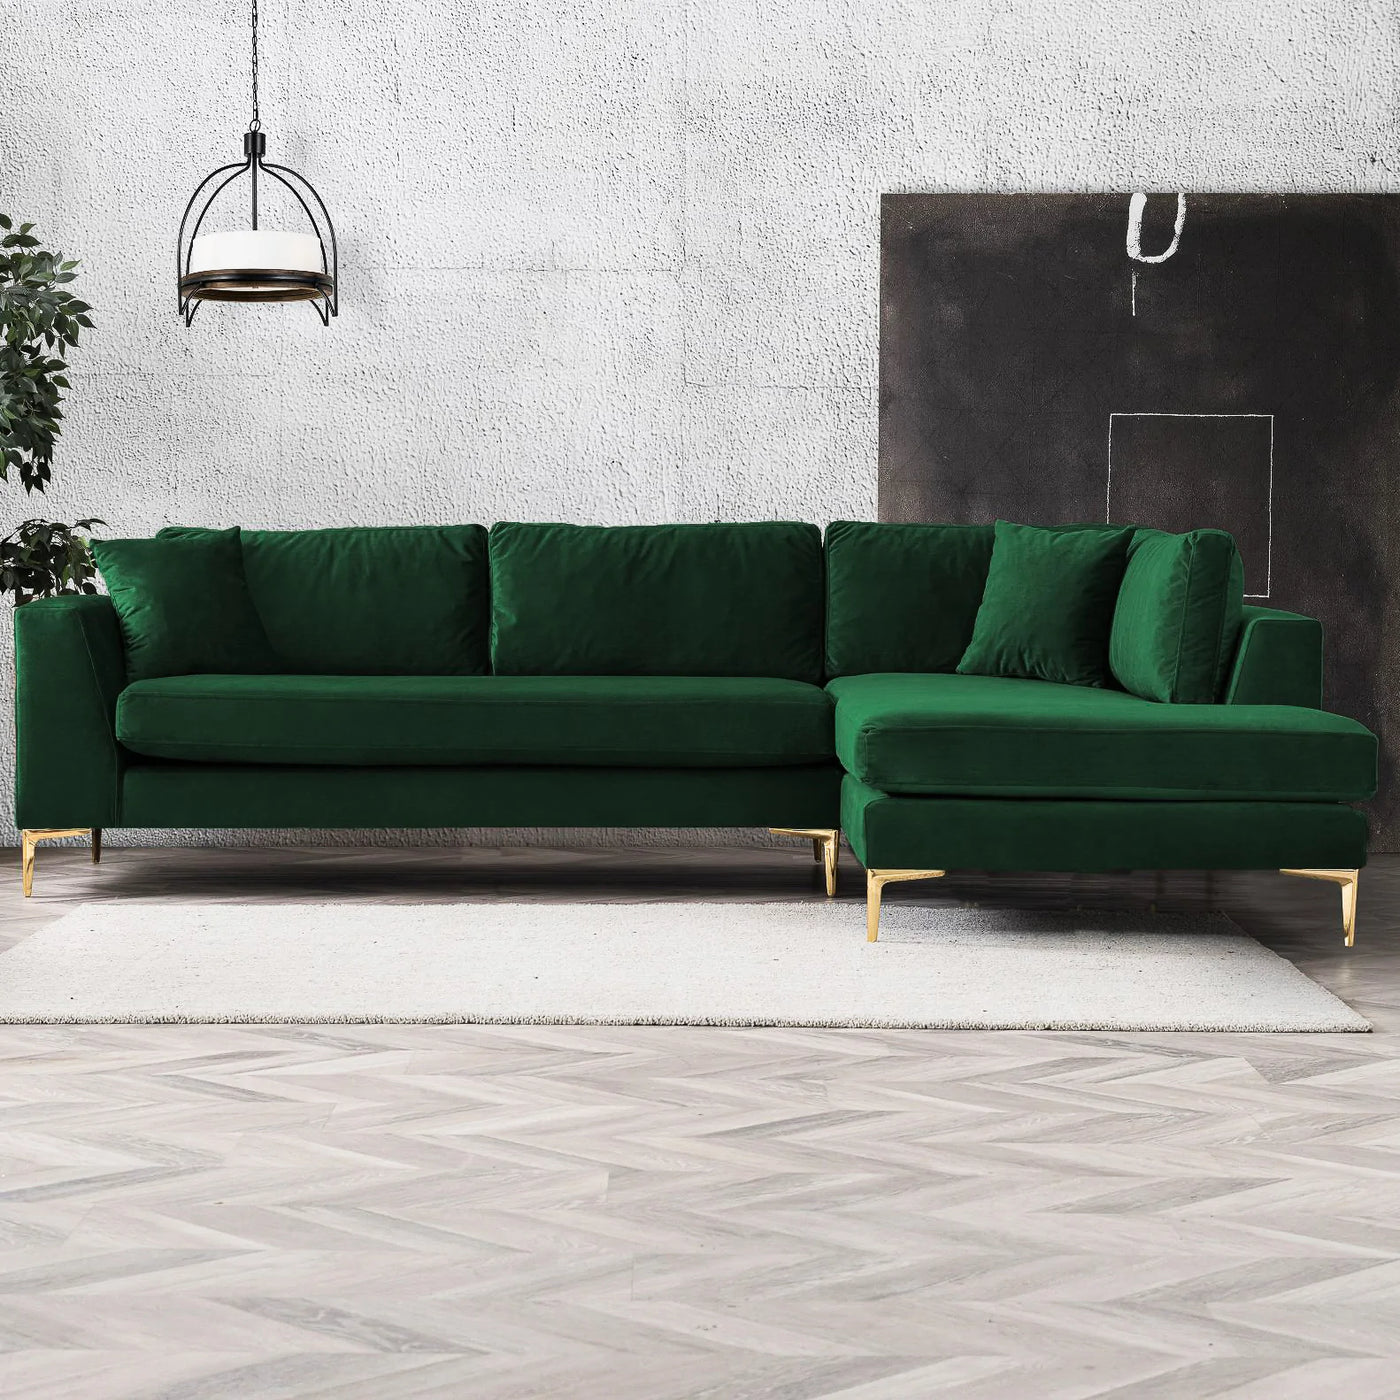 Mid-Century Modern Emerald Green with Gold Accents Sectional Sofa - Left or Right Chaise